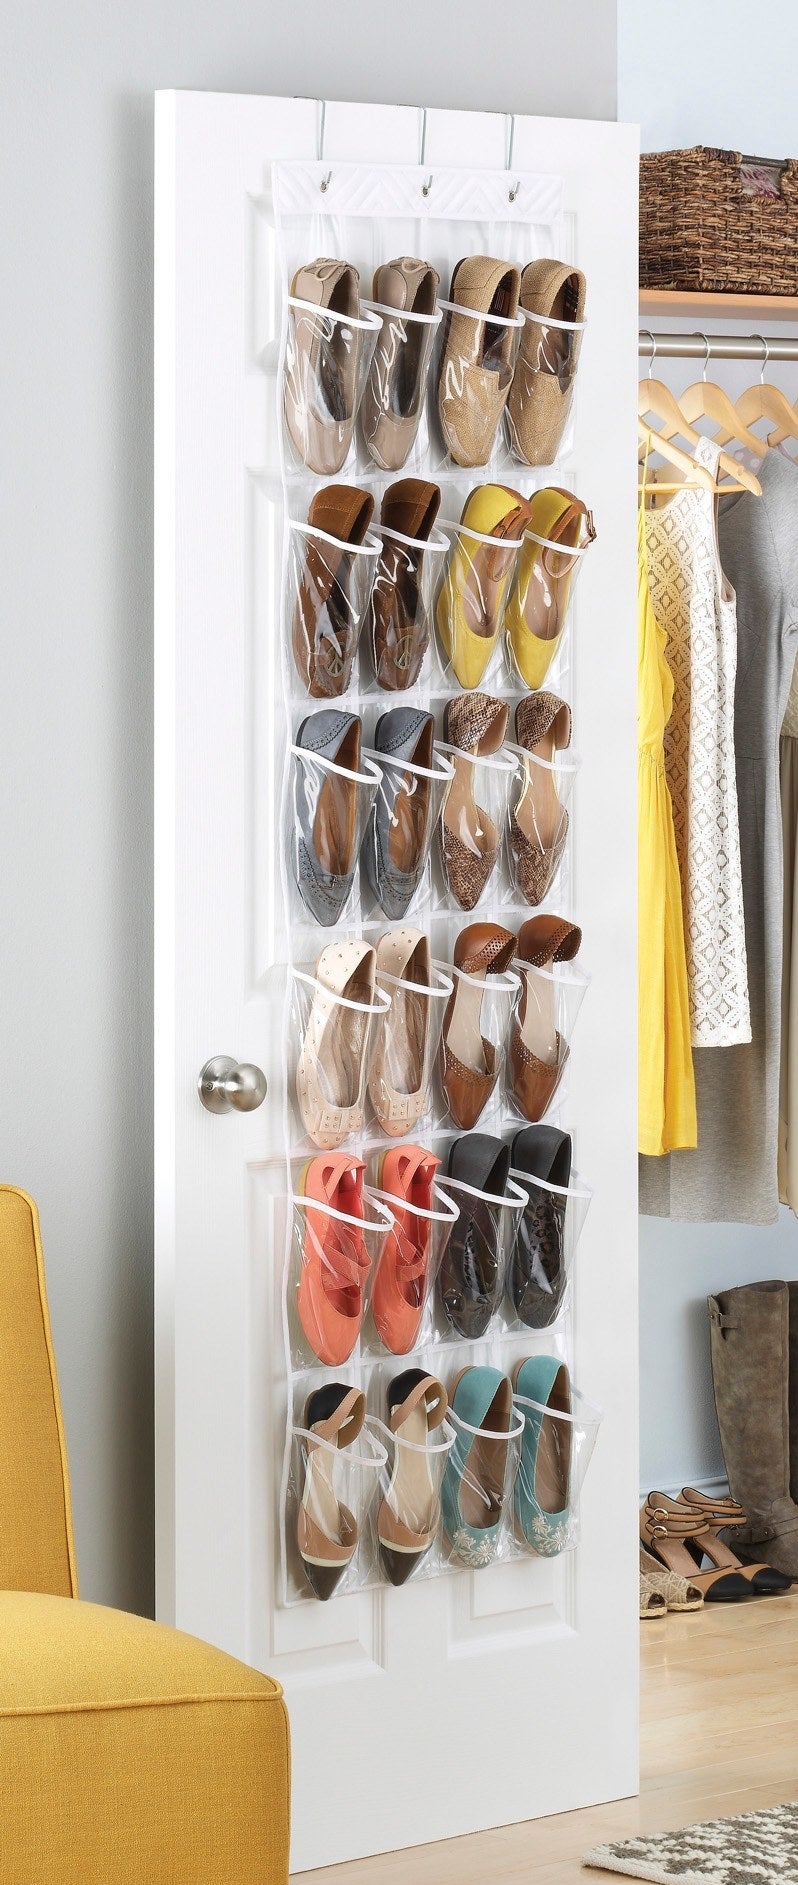 The shoe organizer hanging over a closet door, filled with 12 pairs of shoes